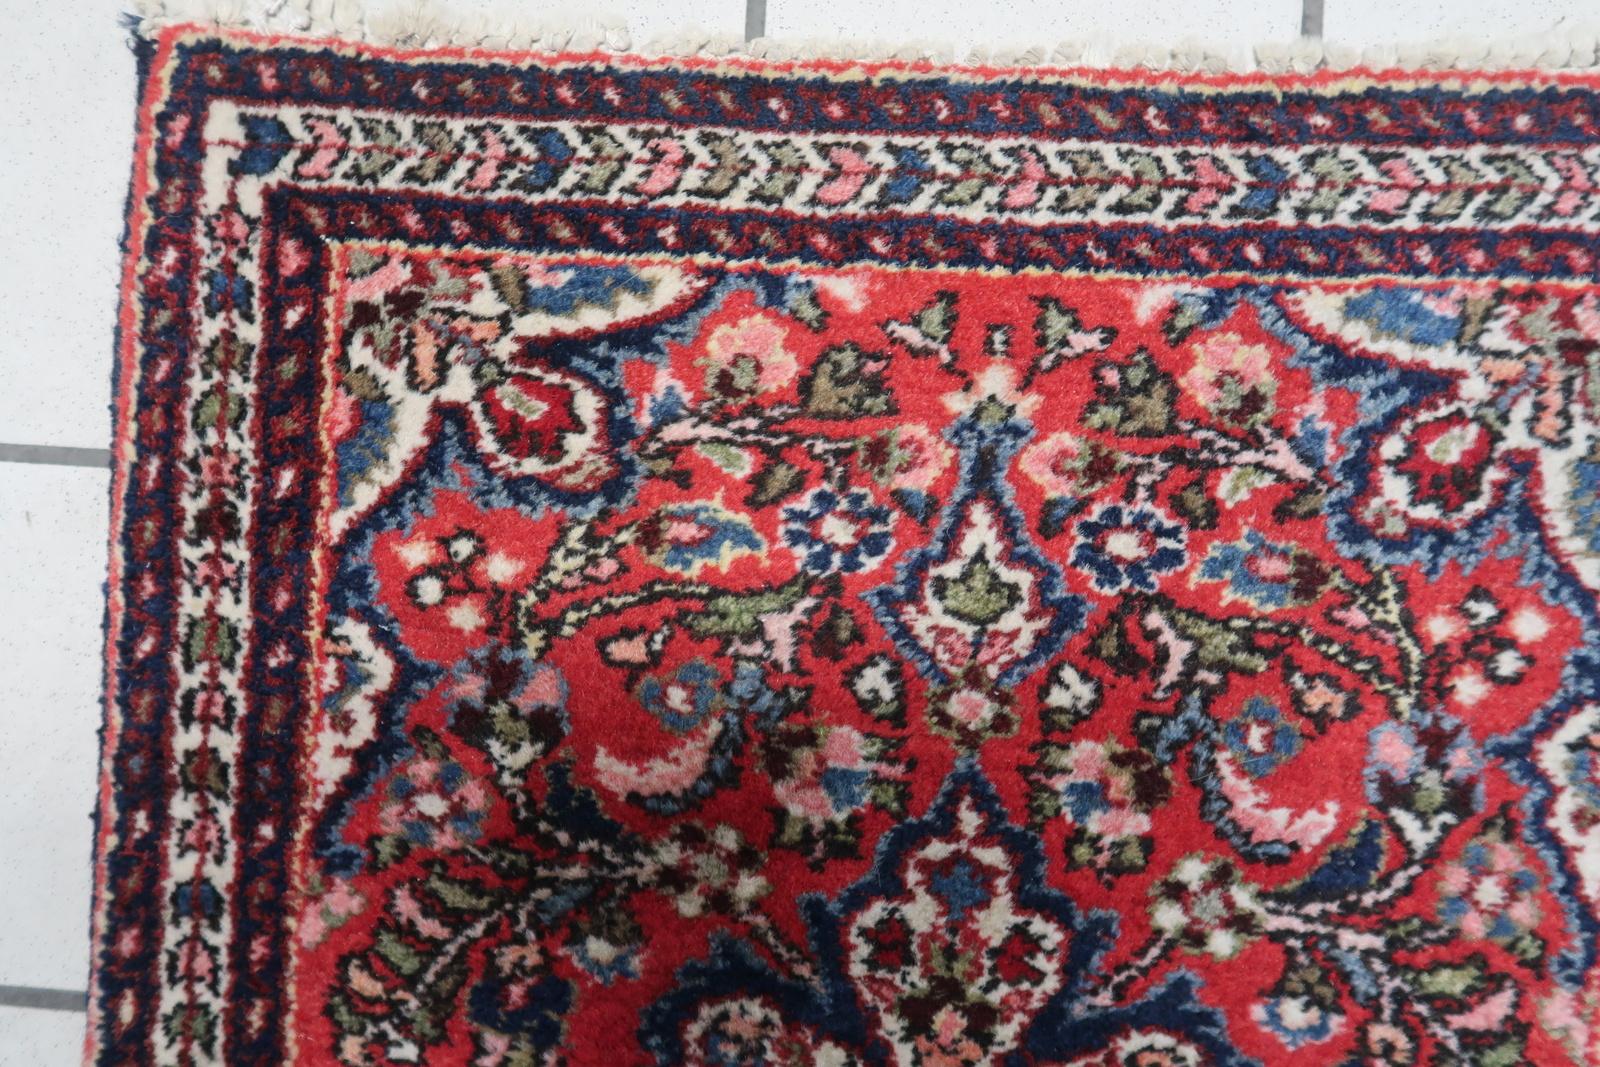 Chinese Handmade Vintage Persian Style Sarouk Rugб 1960s - 1C1075 For Sale